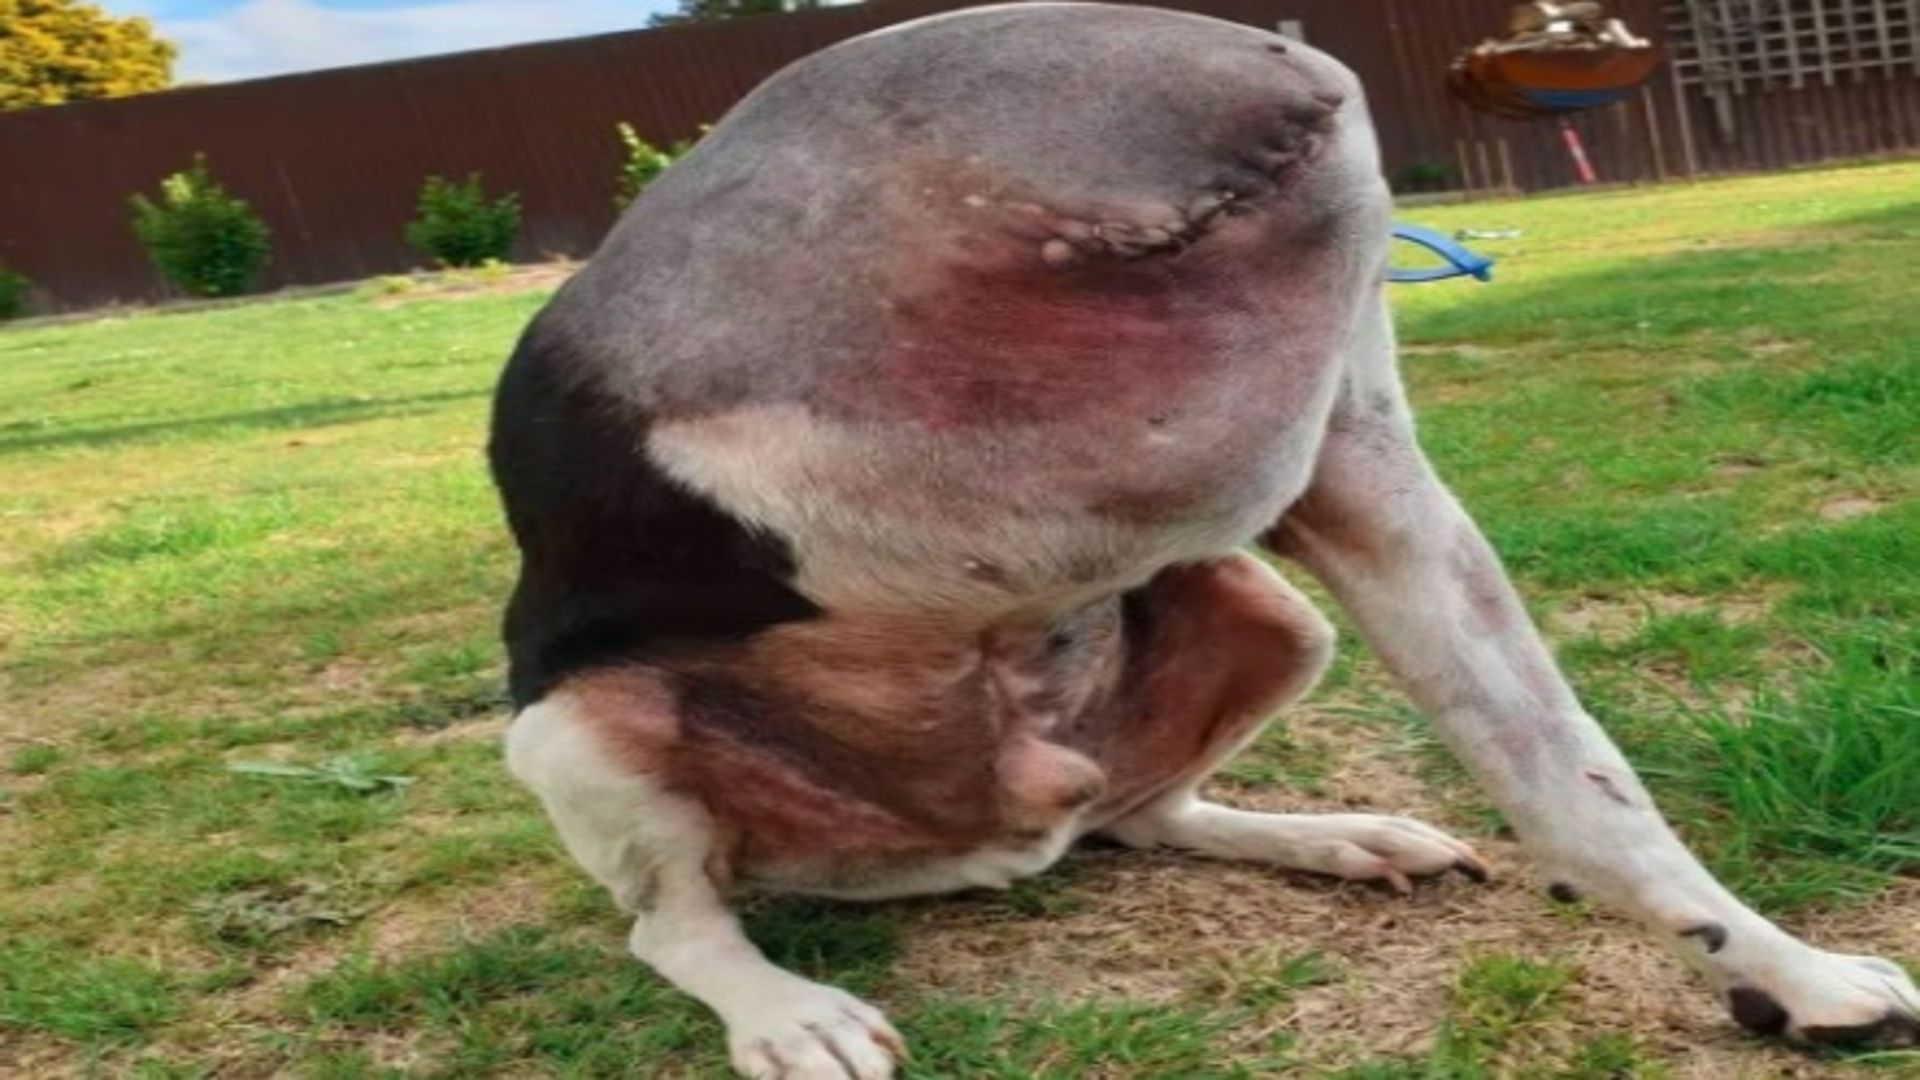 headless dog photo viral on internet people can not believe